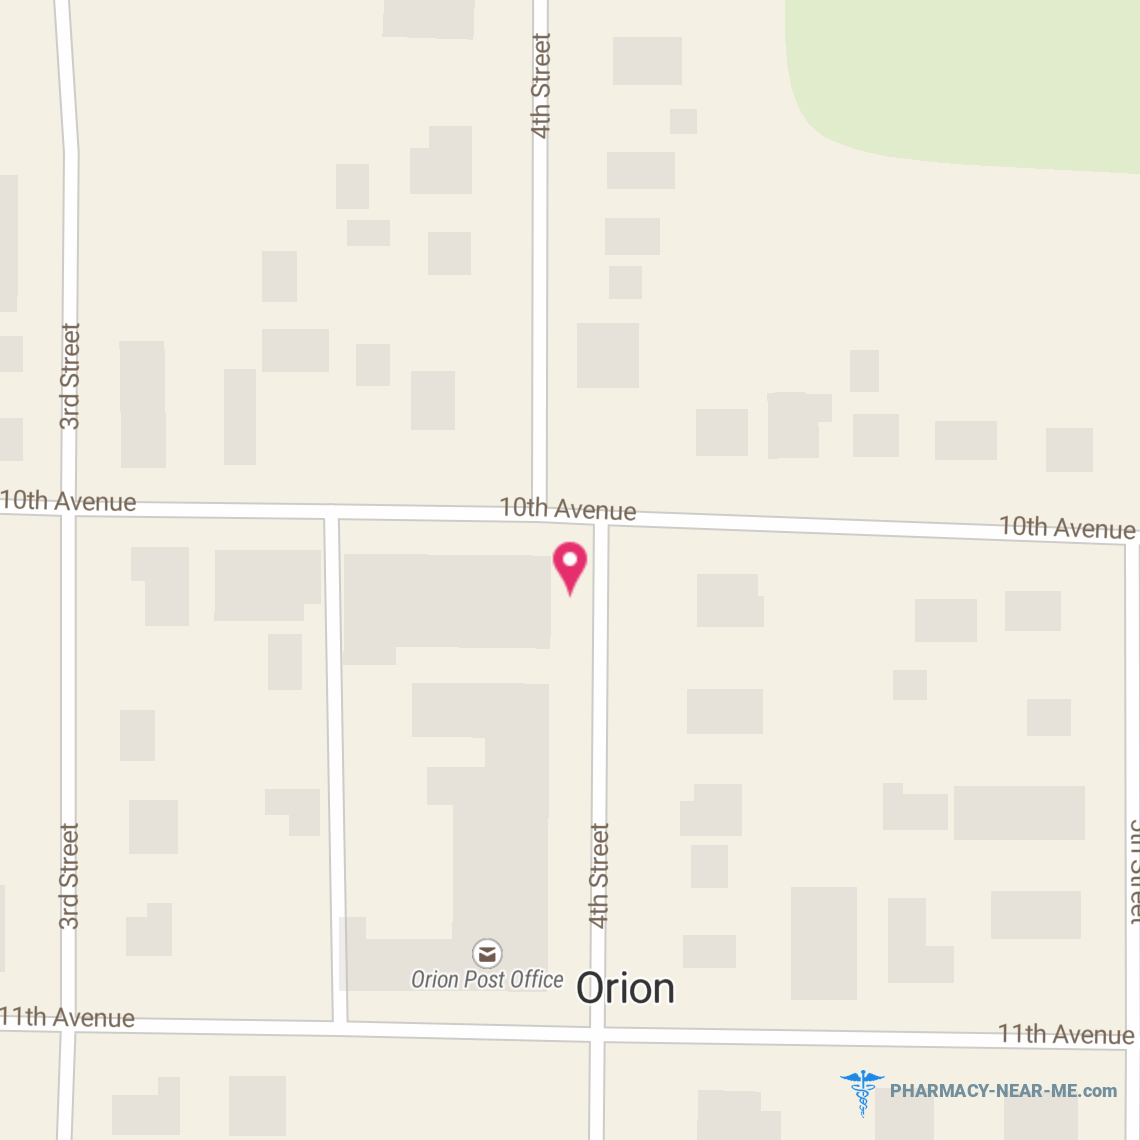 ORION PHARMACY & GIFTS - Pharmacy Hours, Phone, Reviews & Information: 1010 4th Street, Orion, Illinois 61273, United States